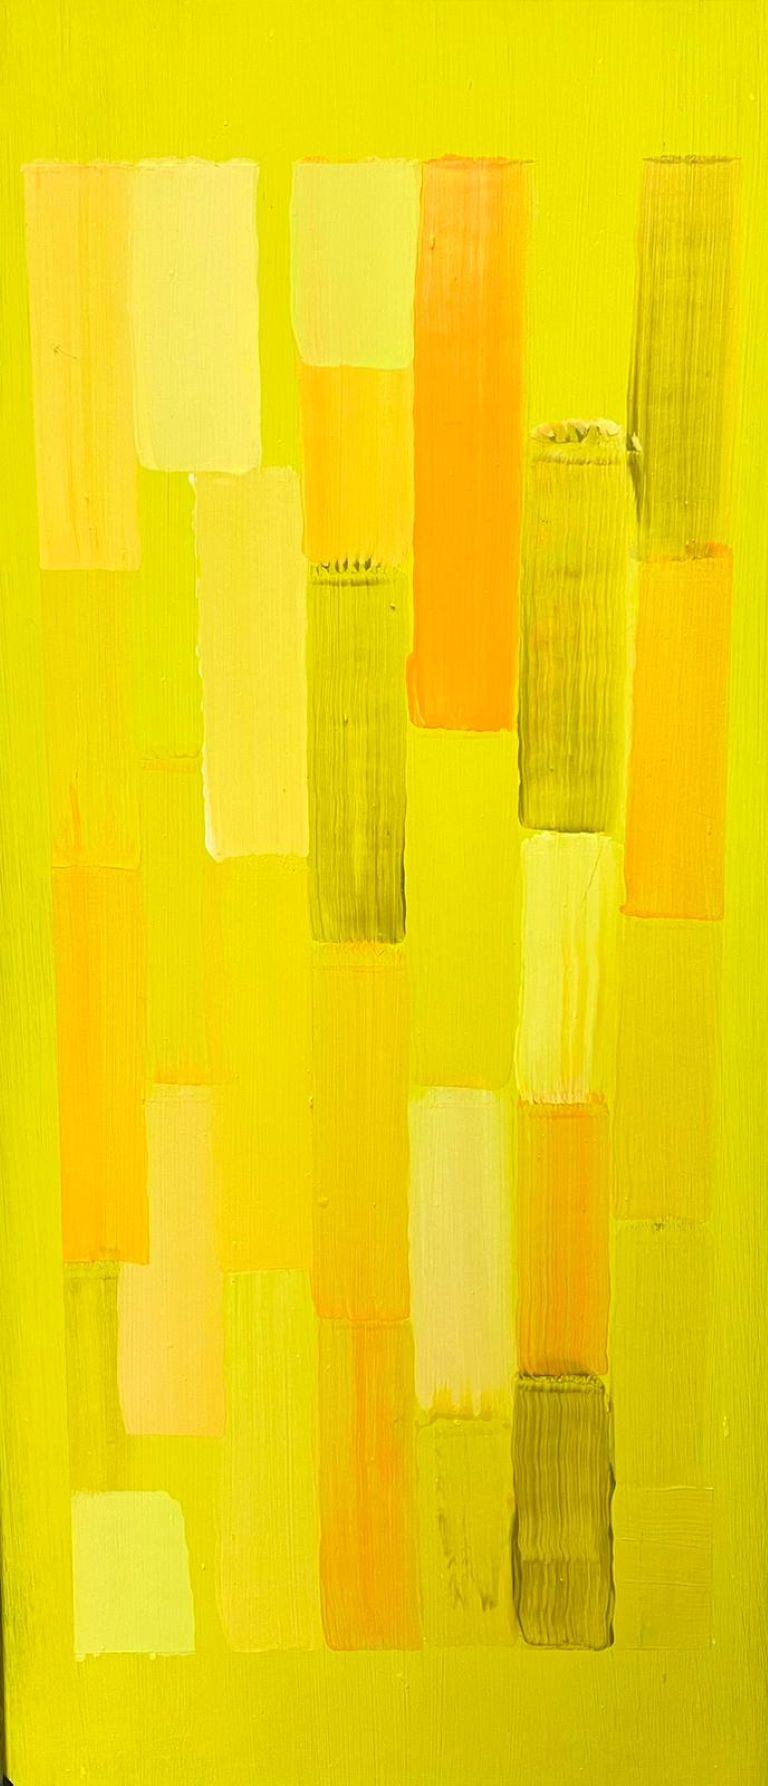 Contemporary British Abstract Painting - Abstract Geometric Cubist British Painting Abstract Shapes Yellow Shapes